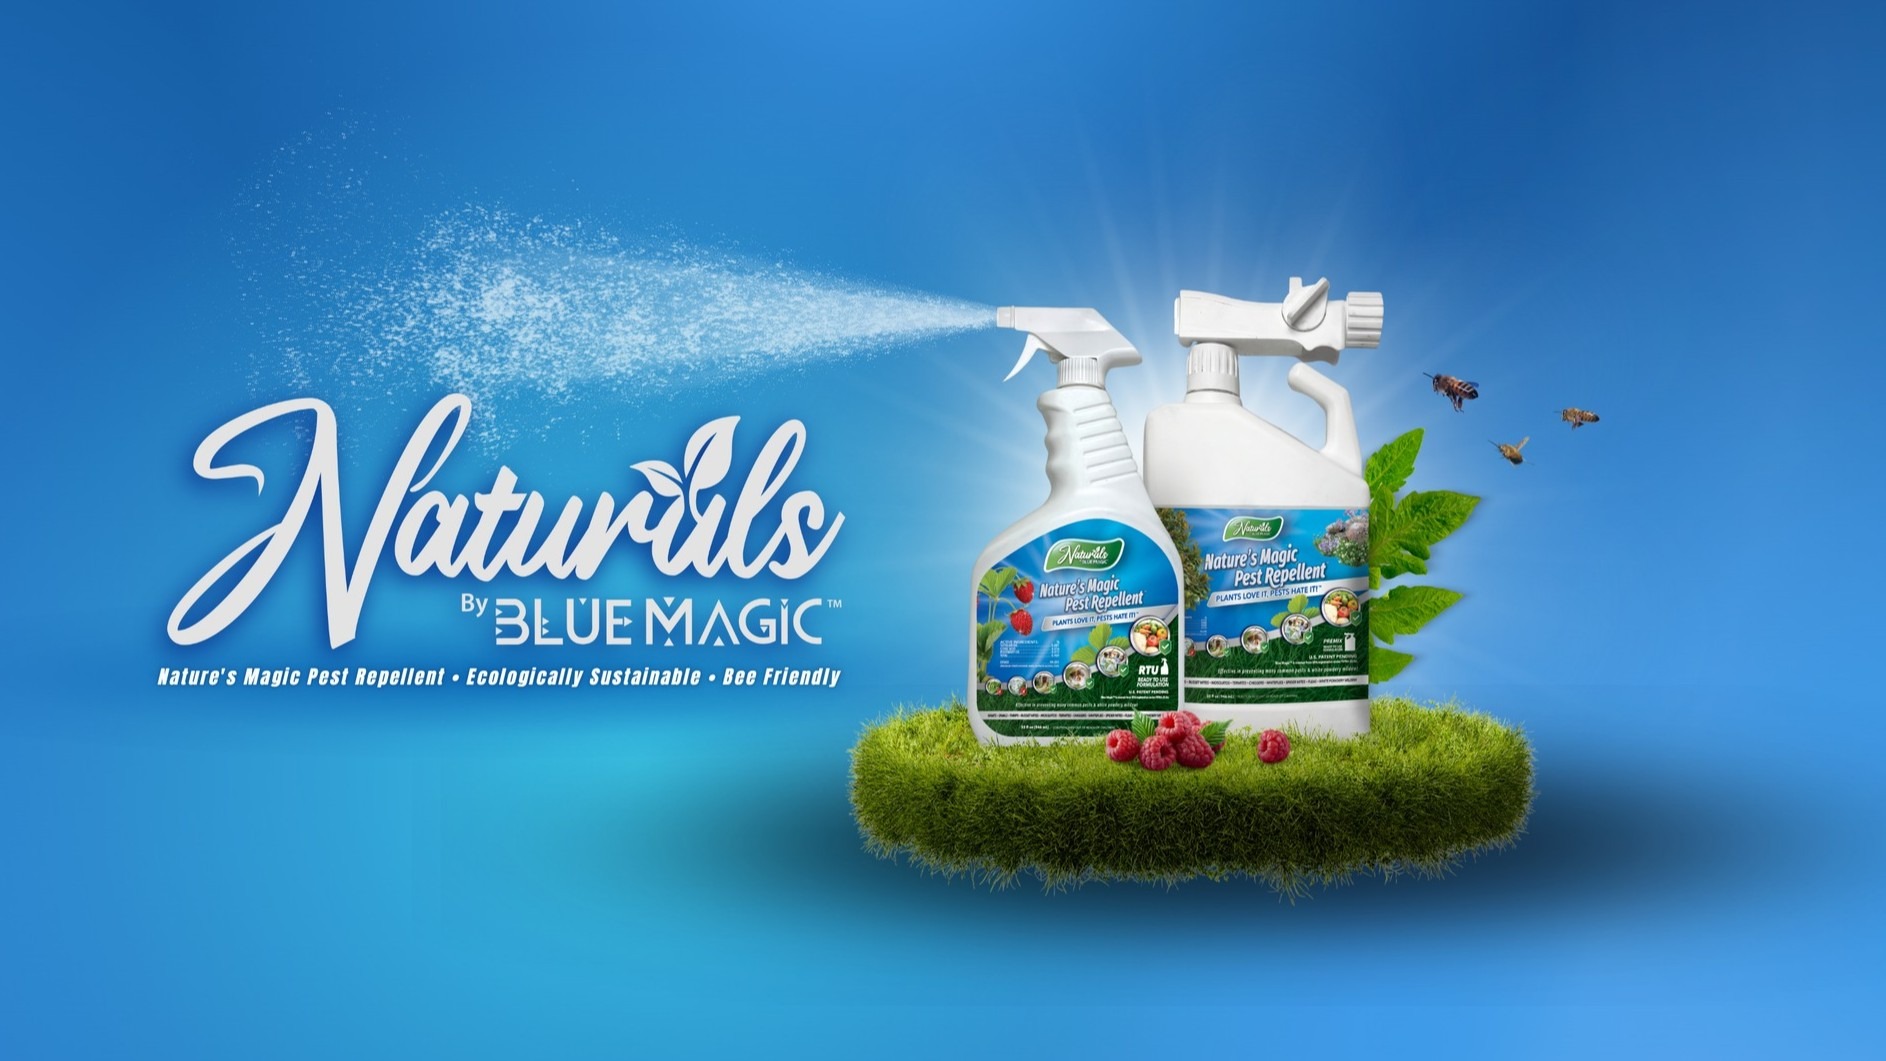 Blue Magic Naturals is excited to showcase at Earth X 2023